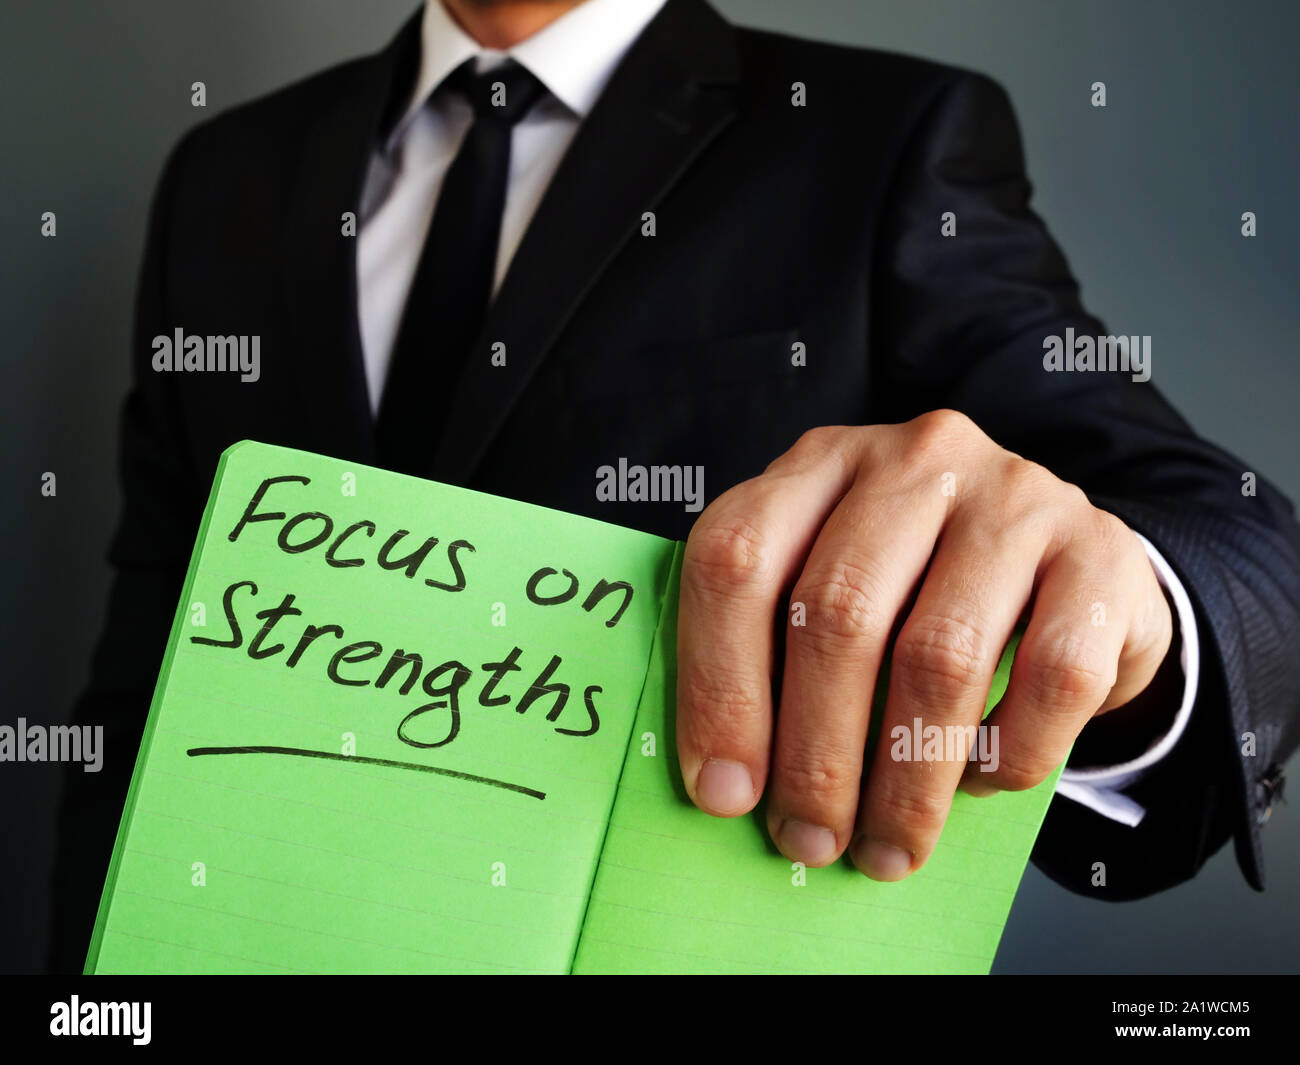 Focus on Strengths sign in the green notebook. Stock Photo